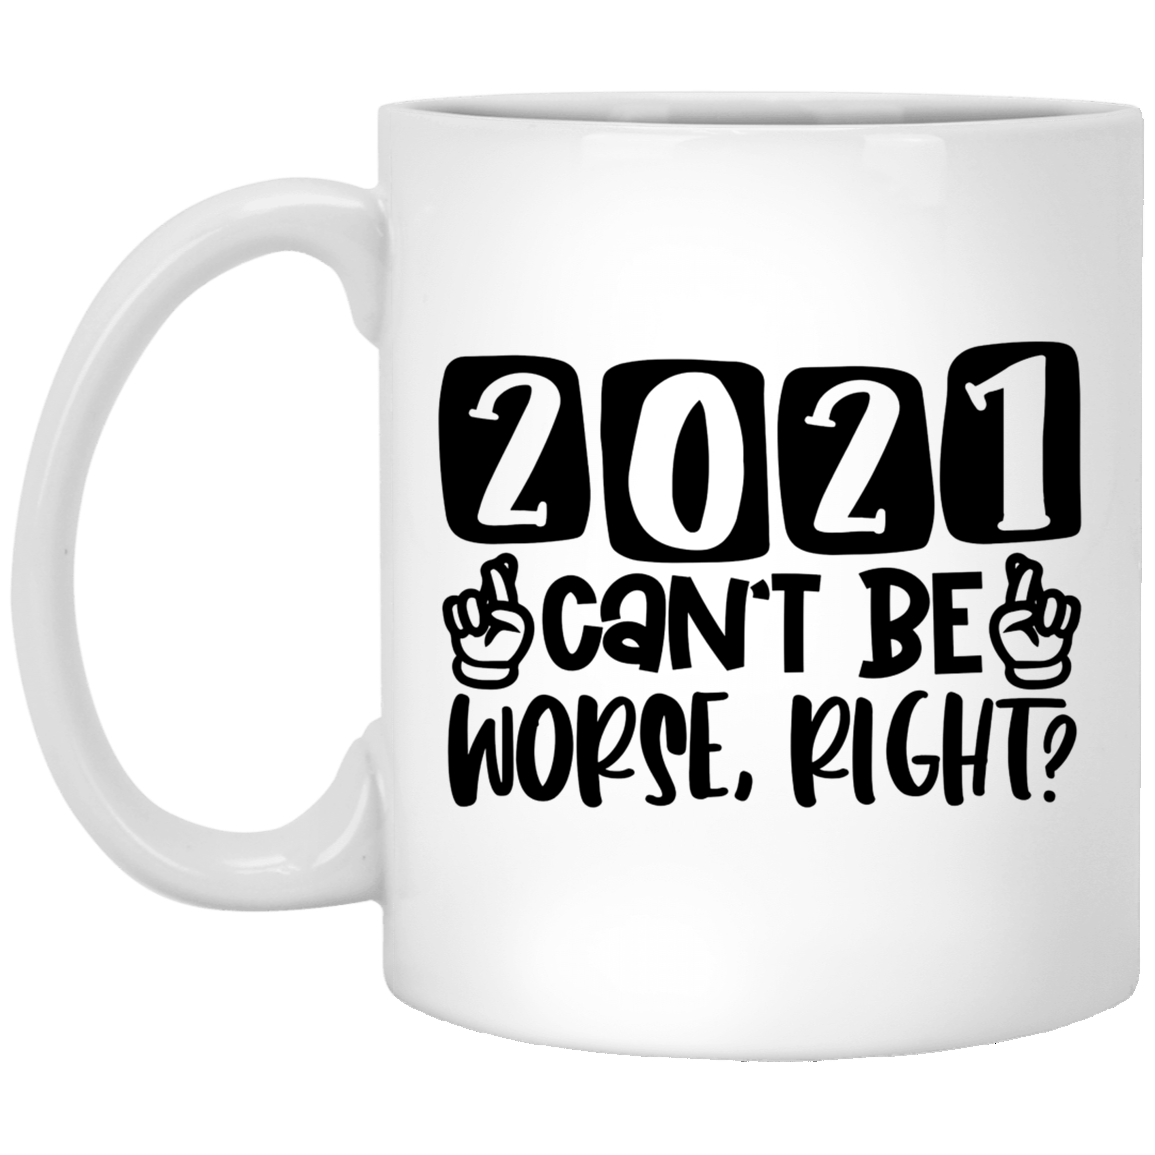 2021 Can't Be Worse Right Mug